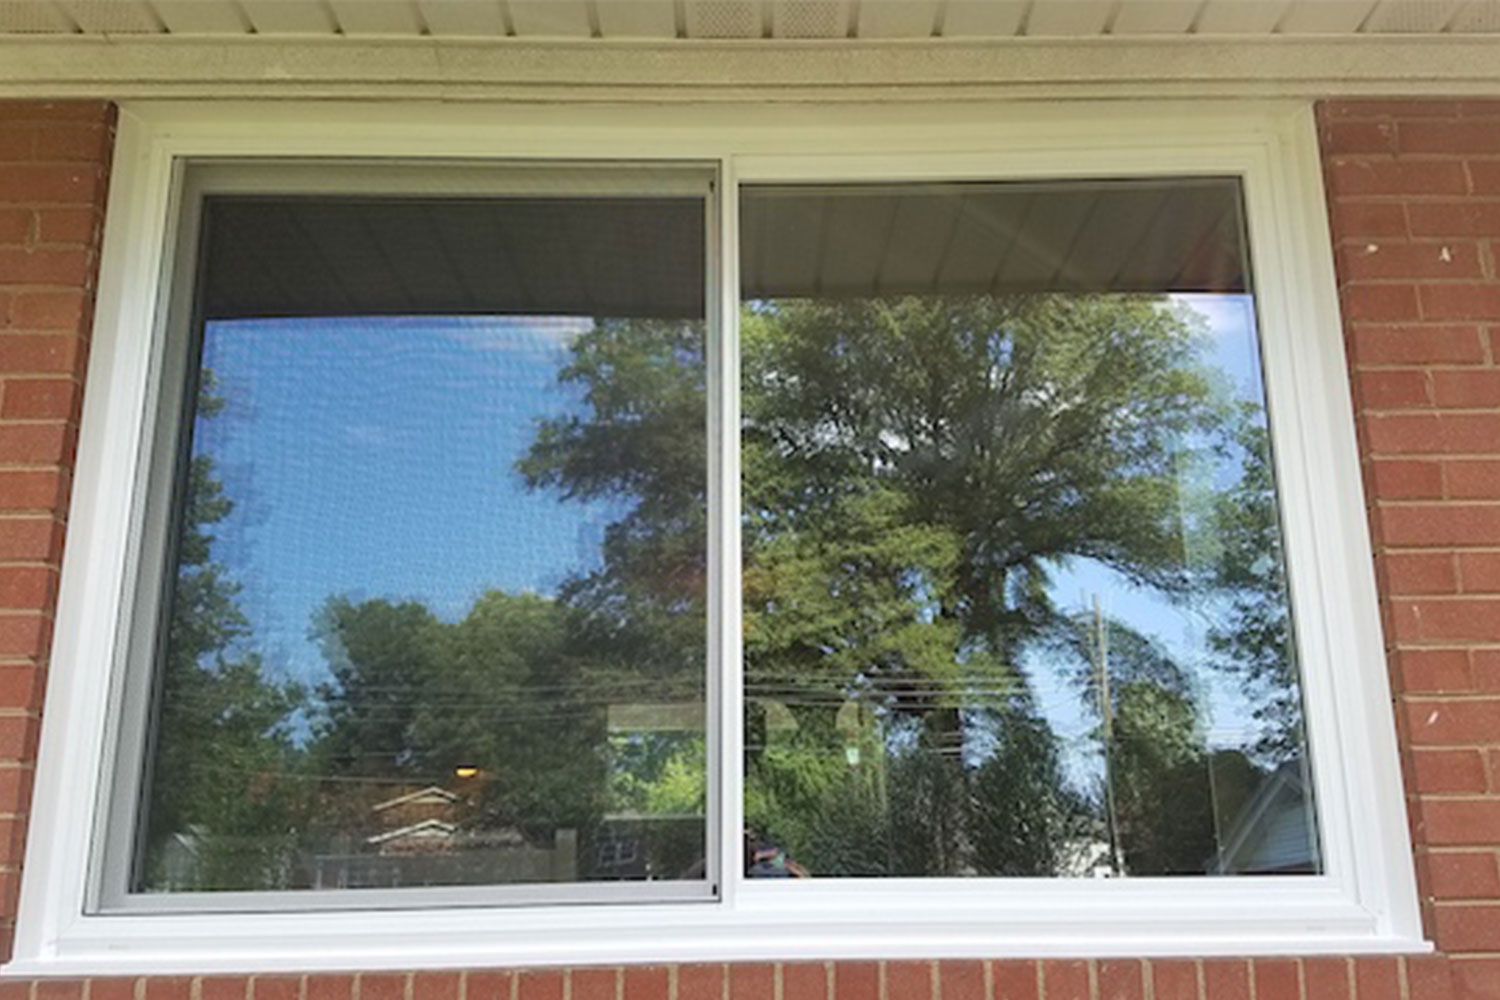 A window of a house from the outside with the reflection of trees